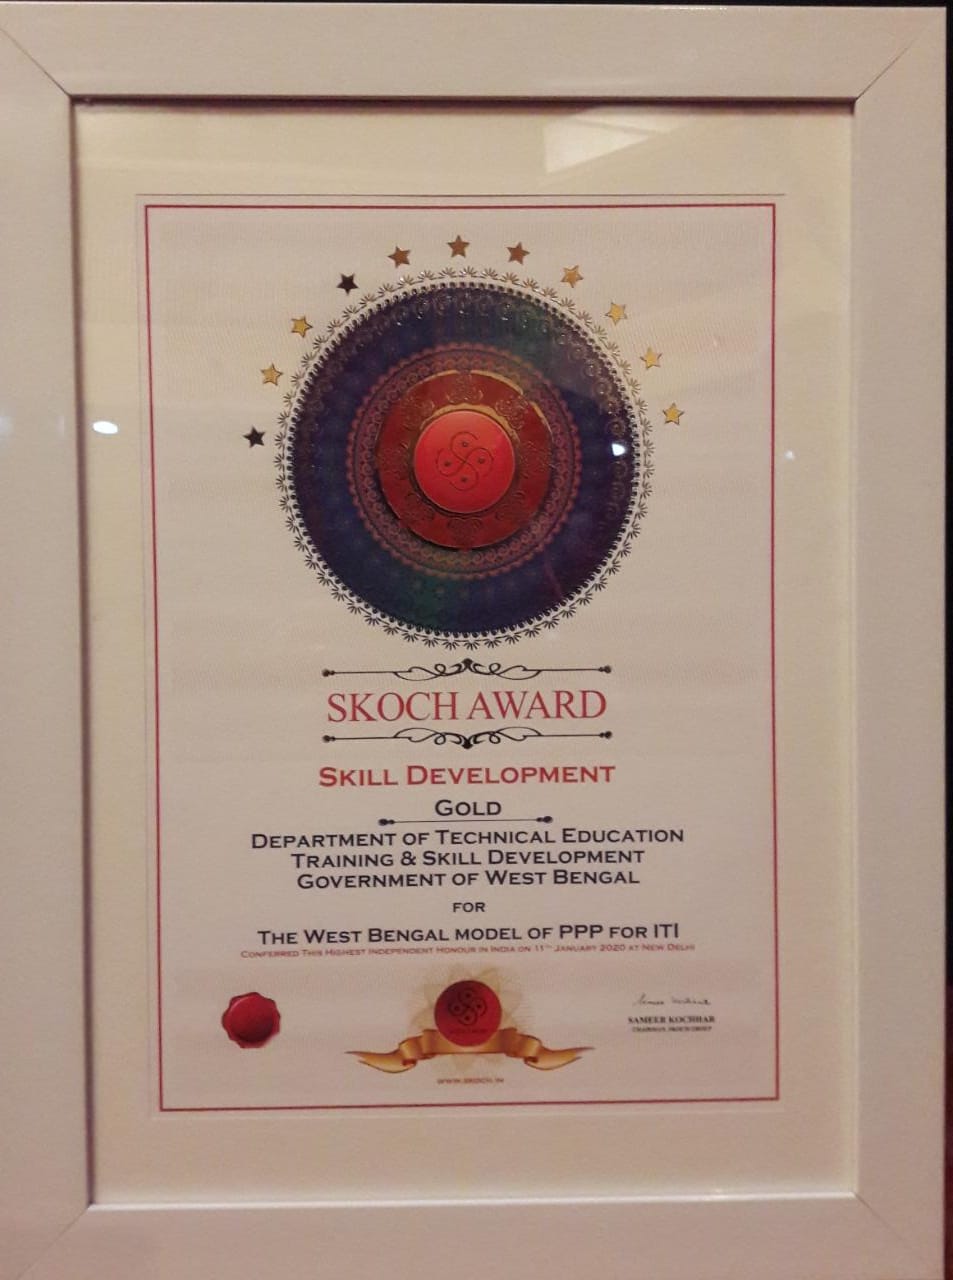 SKOCH Award for Skill Development-GOLD to Department of Technical Education Training & Skill Development, Govt of West Bengal for their project 'The West Bengal model of PPP for ITI'